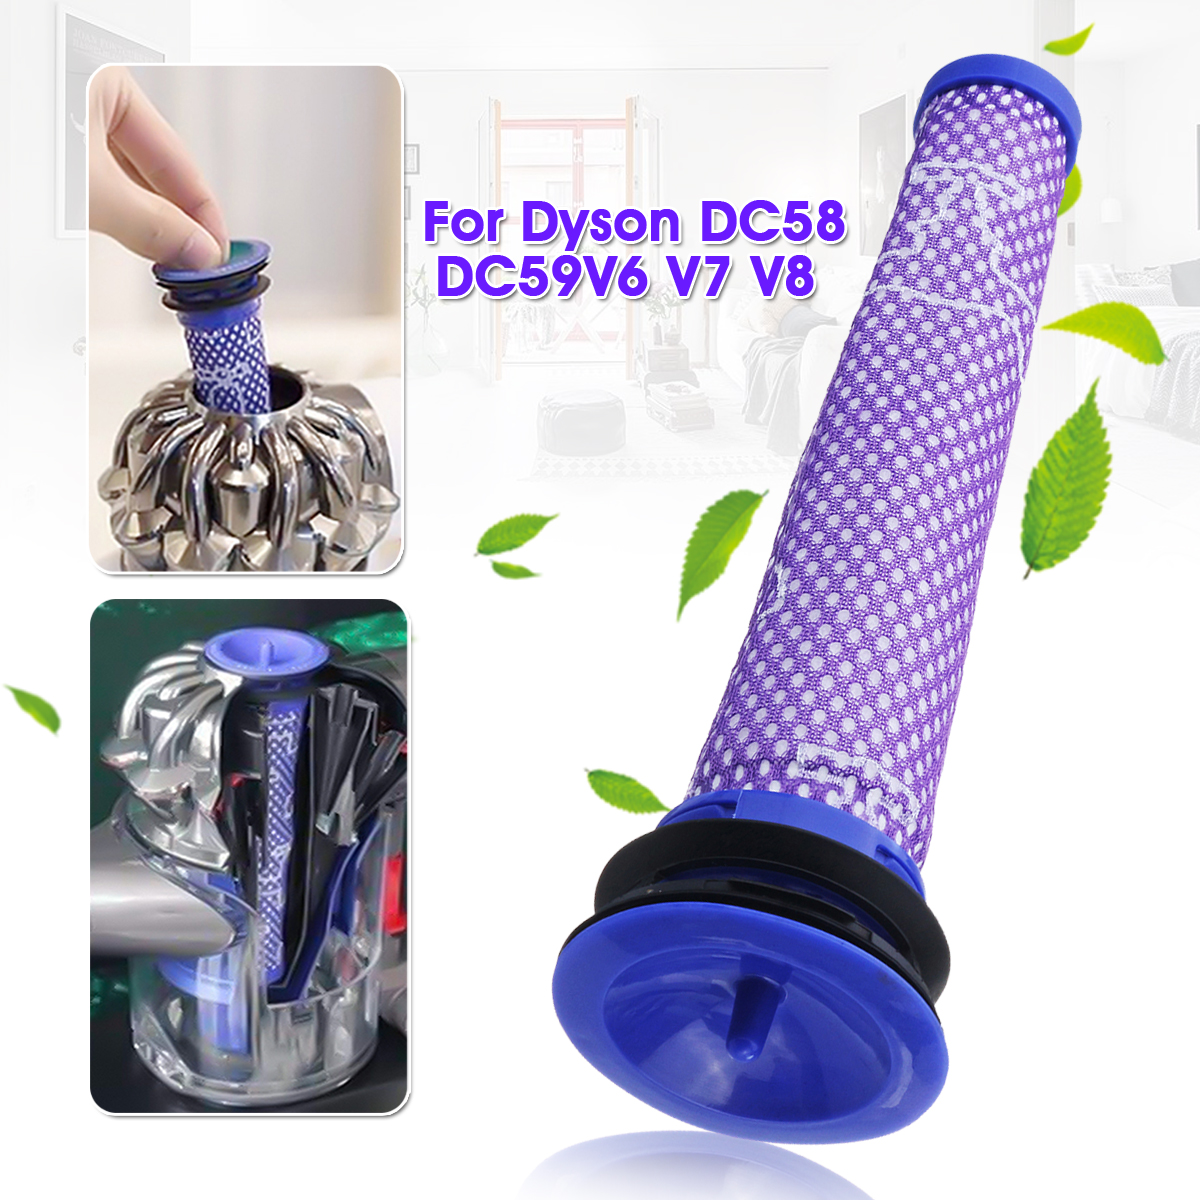 Vacuum-Motor-Filter-For-Dyson-DC58-DC59V6-V7-V8-Replacement-Accessories-1537868